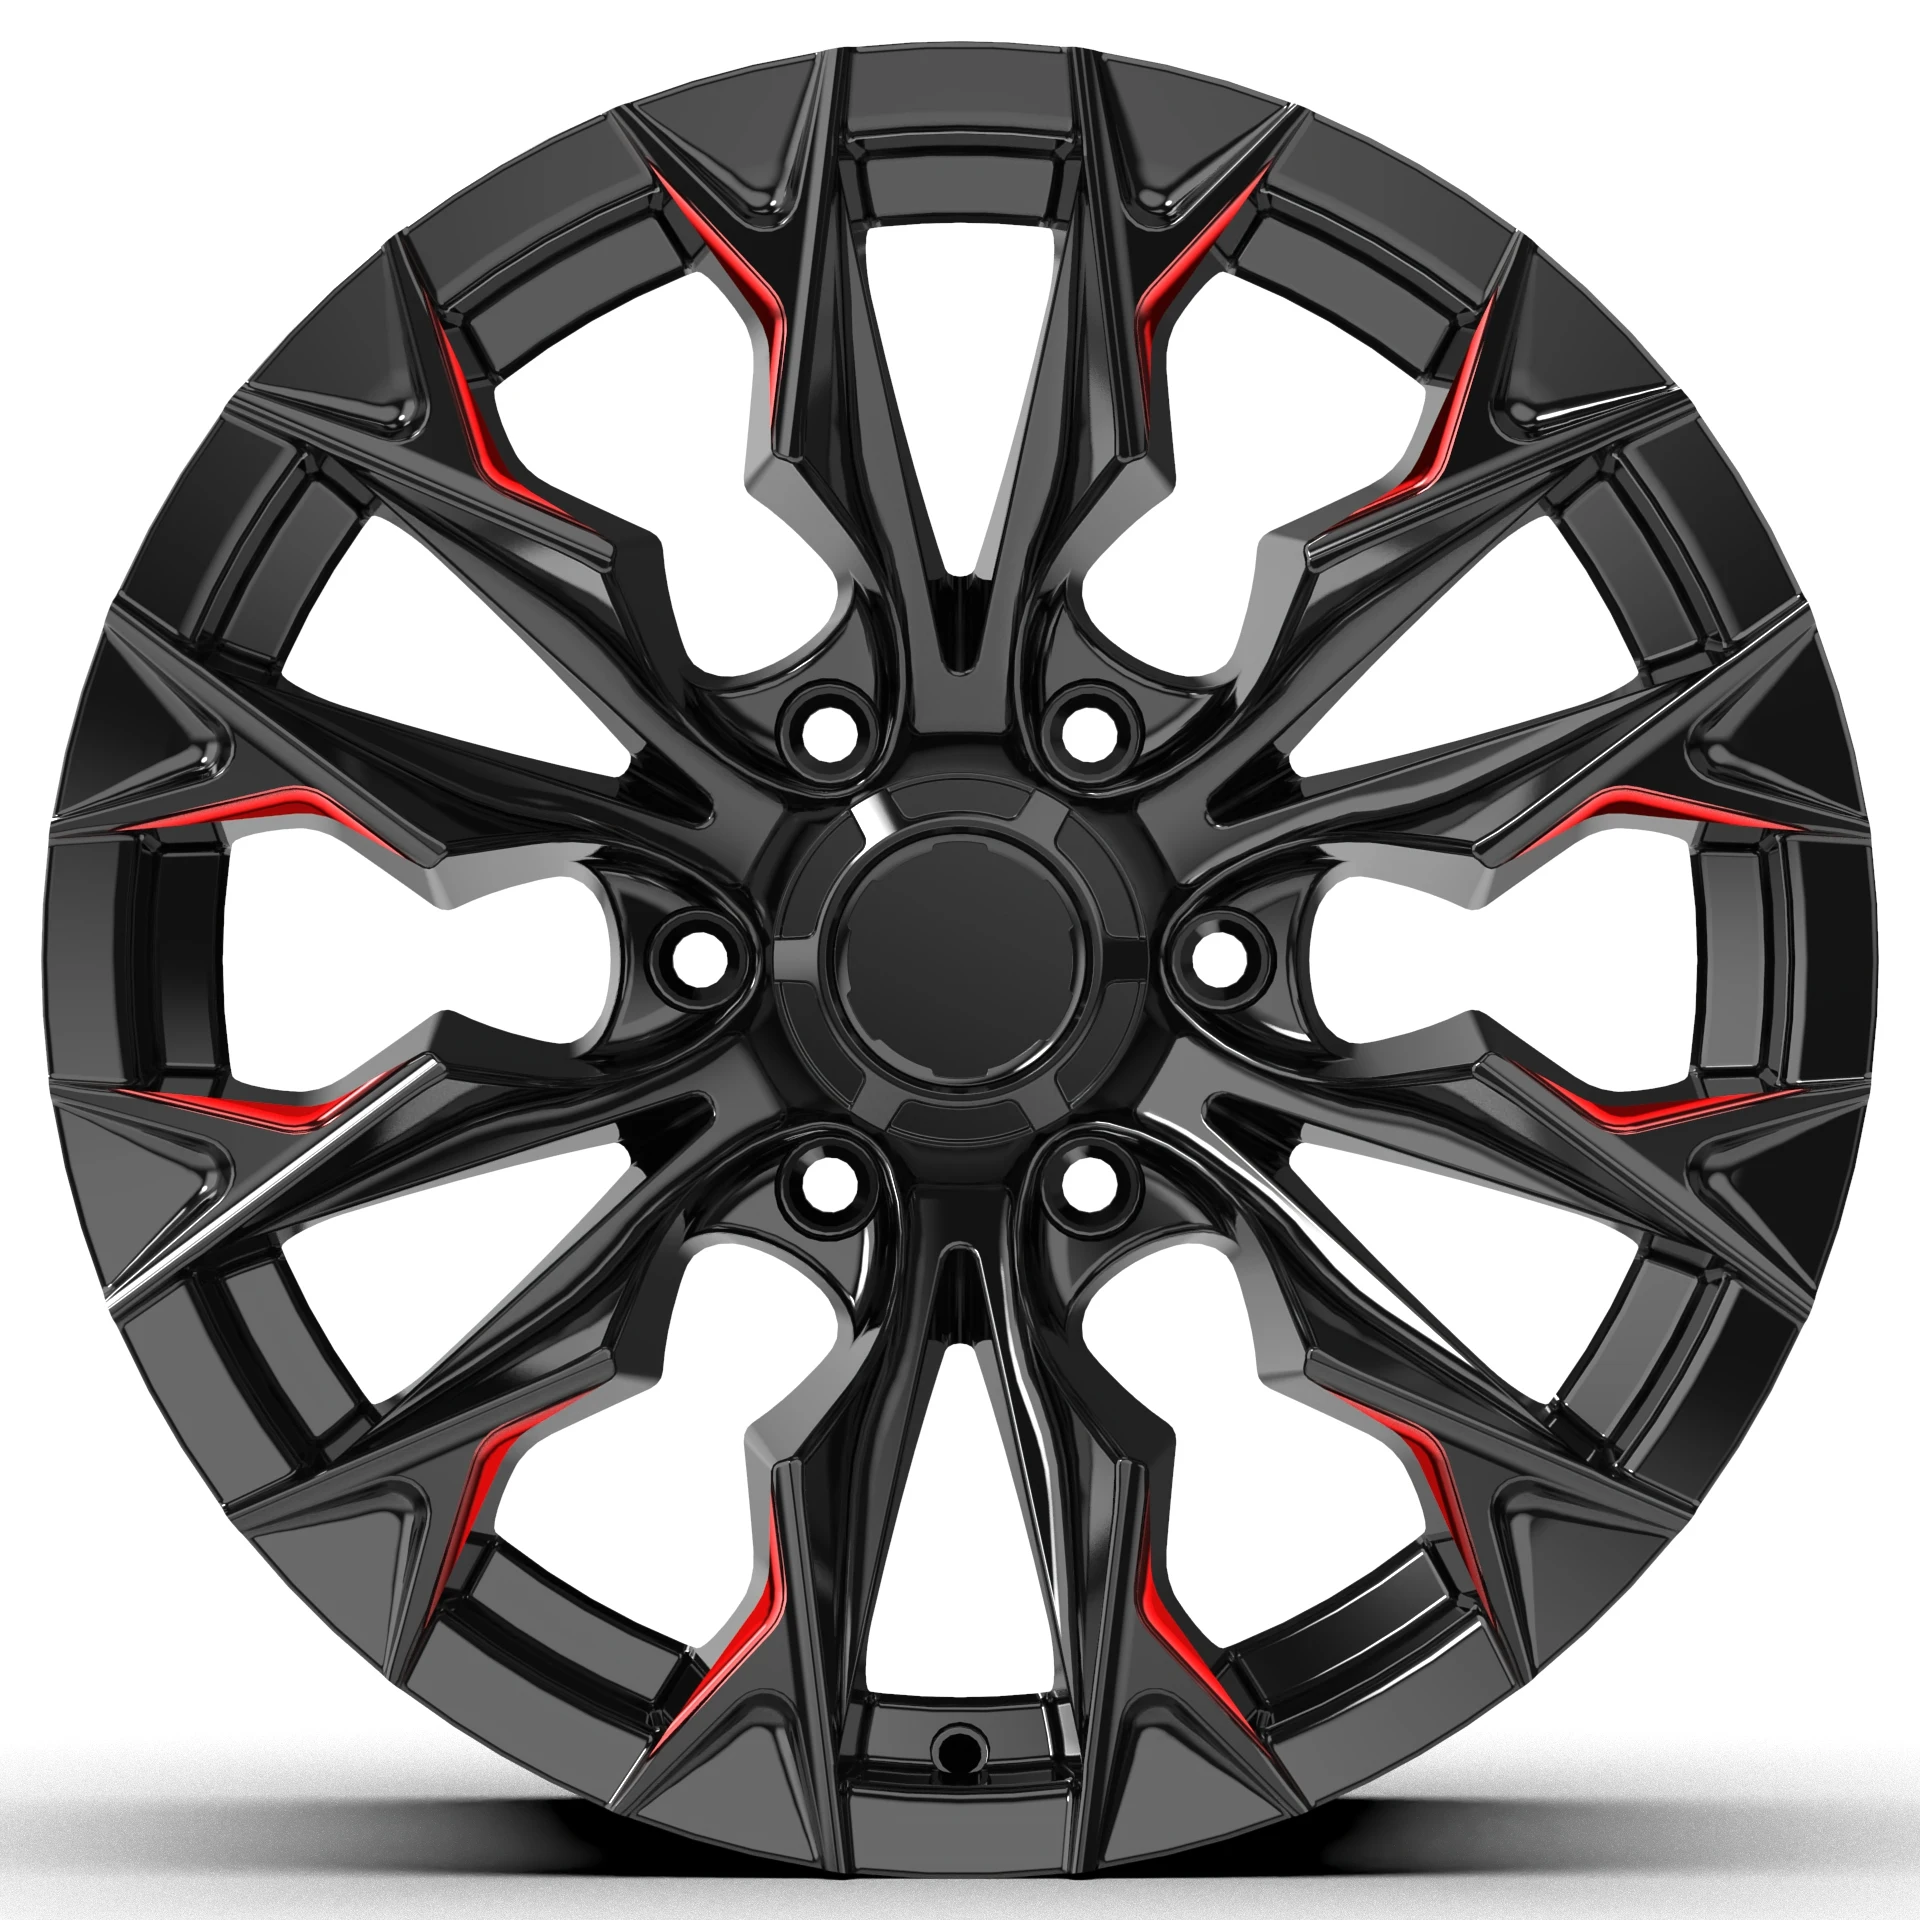 

JT227 16 17 18inch alloy aluminium wheel off road 4x4 casting alloy rims 6x114.3 6x139.7 high graded for OEM aftermarket